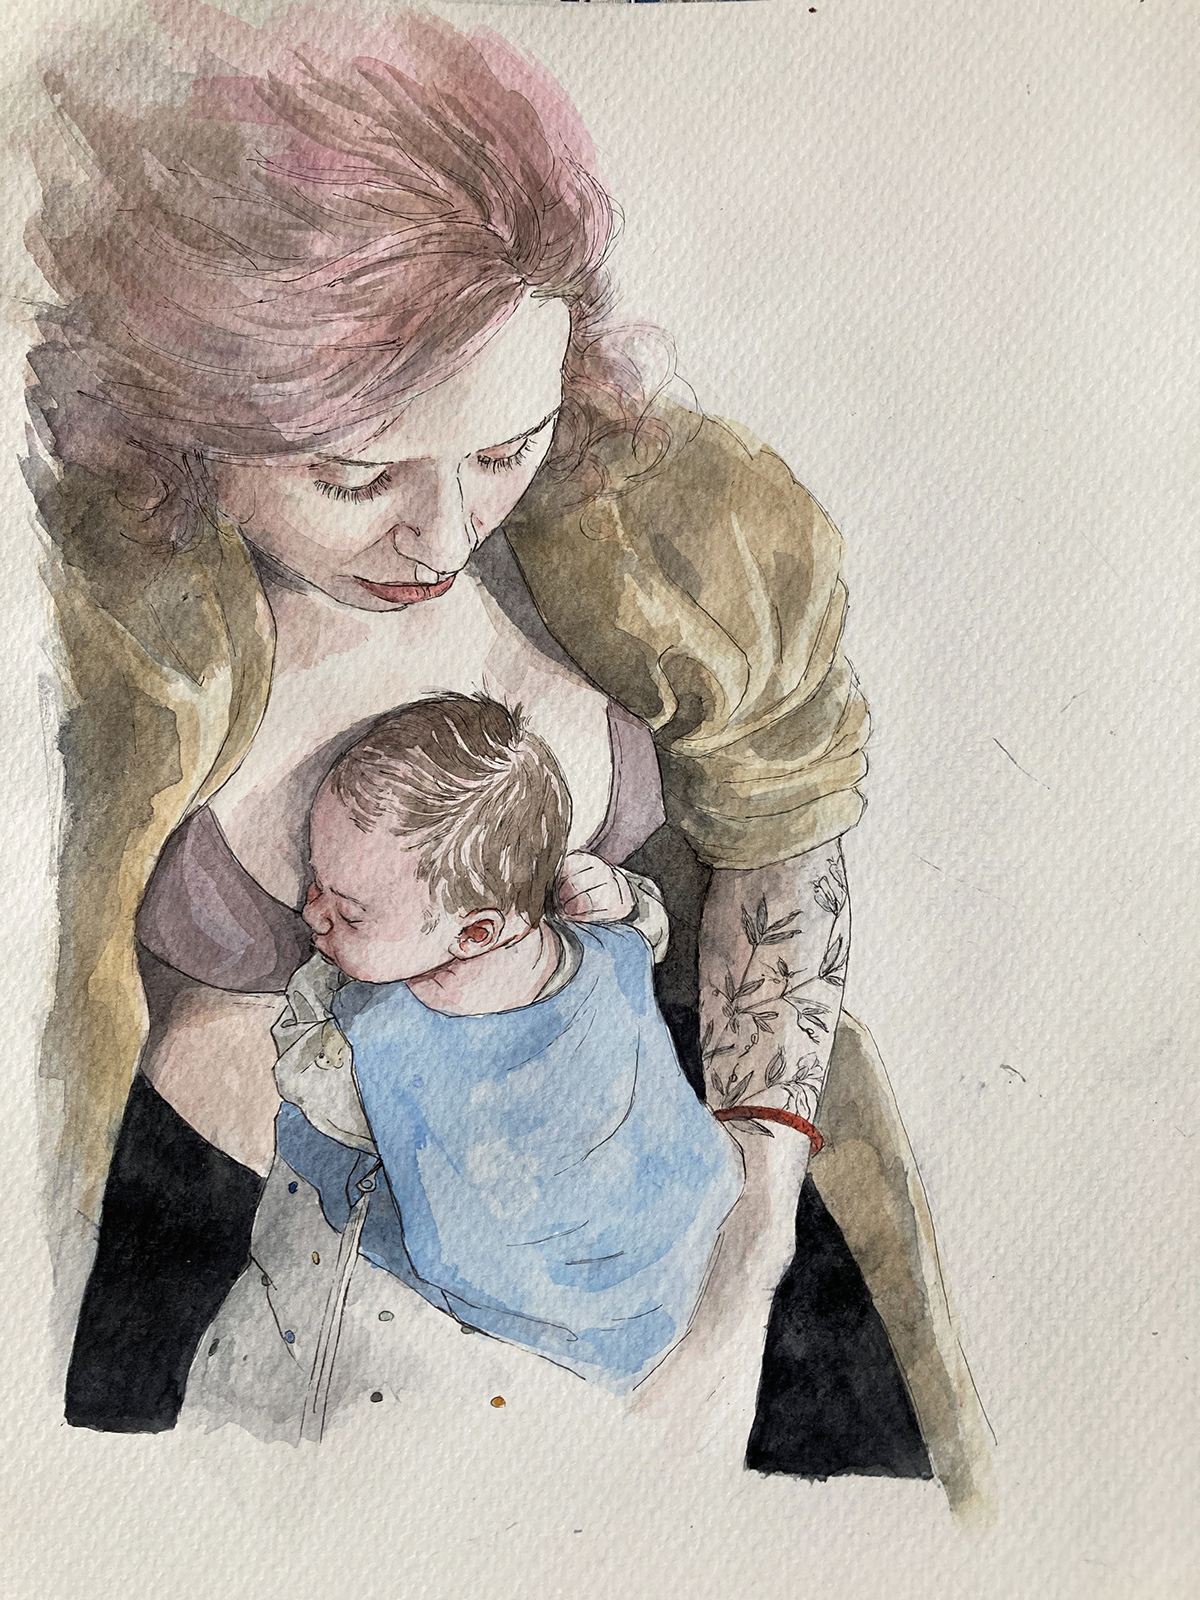 watercolor portrait of mother and child

